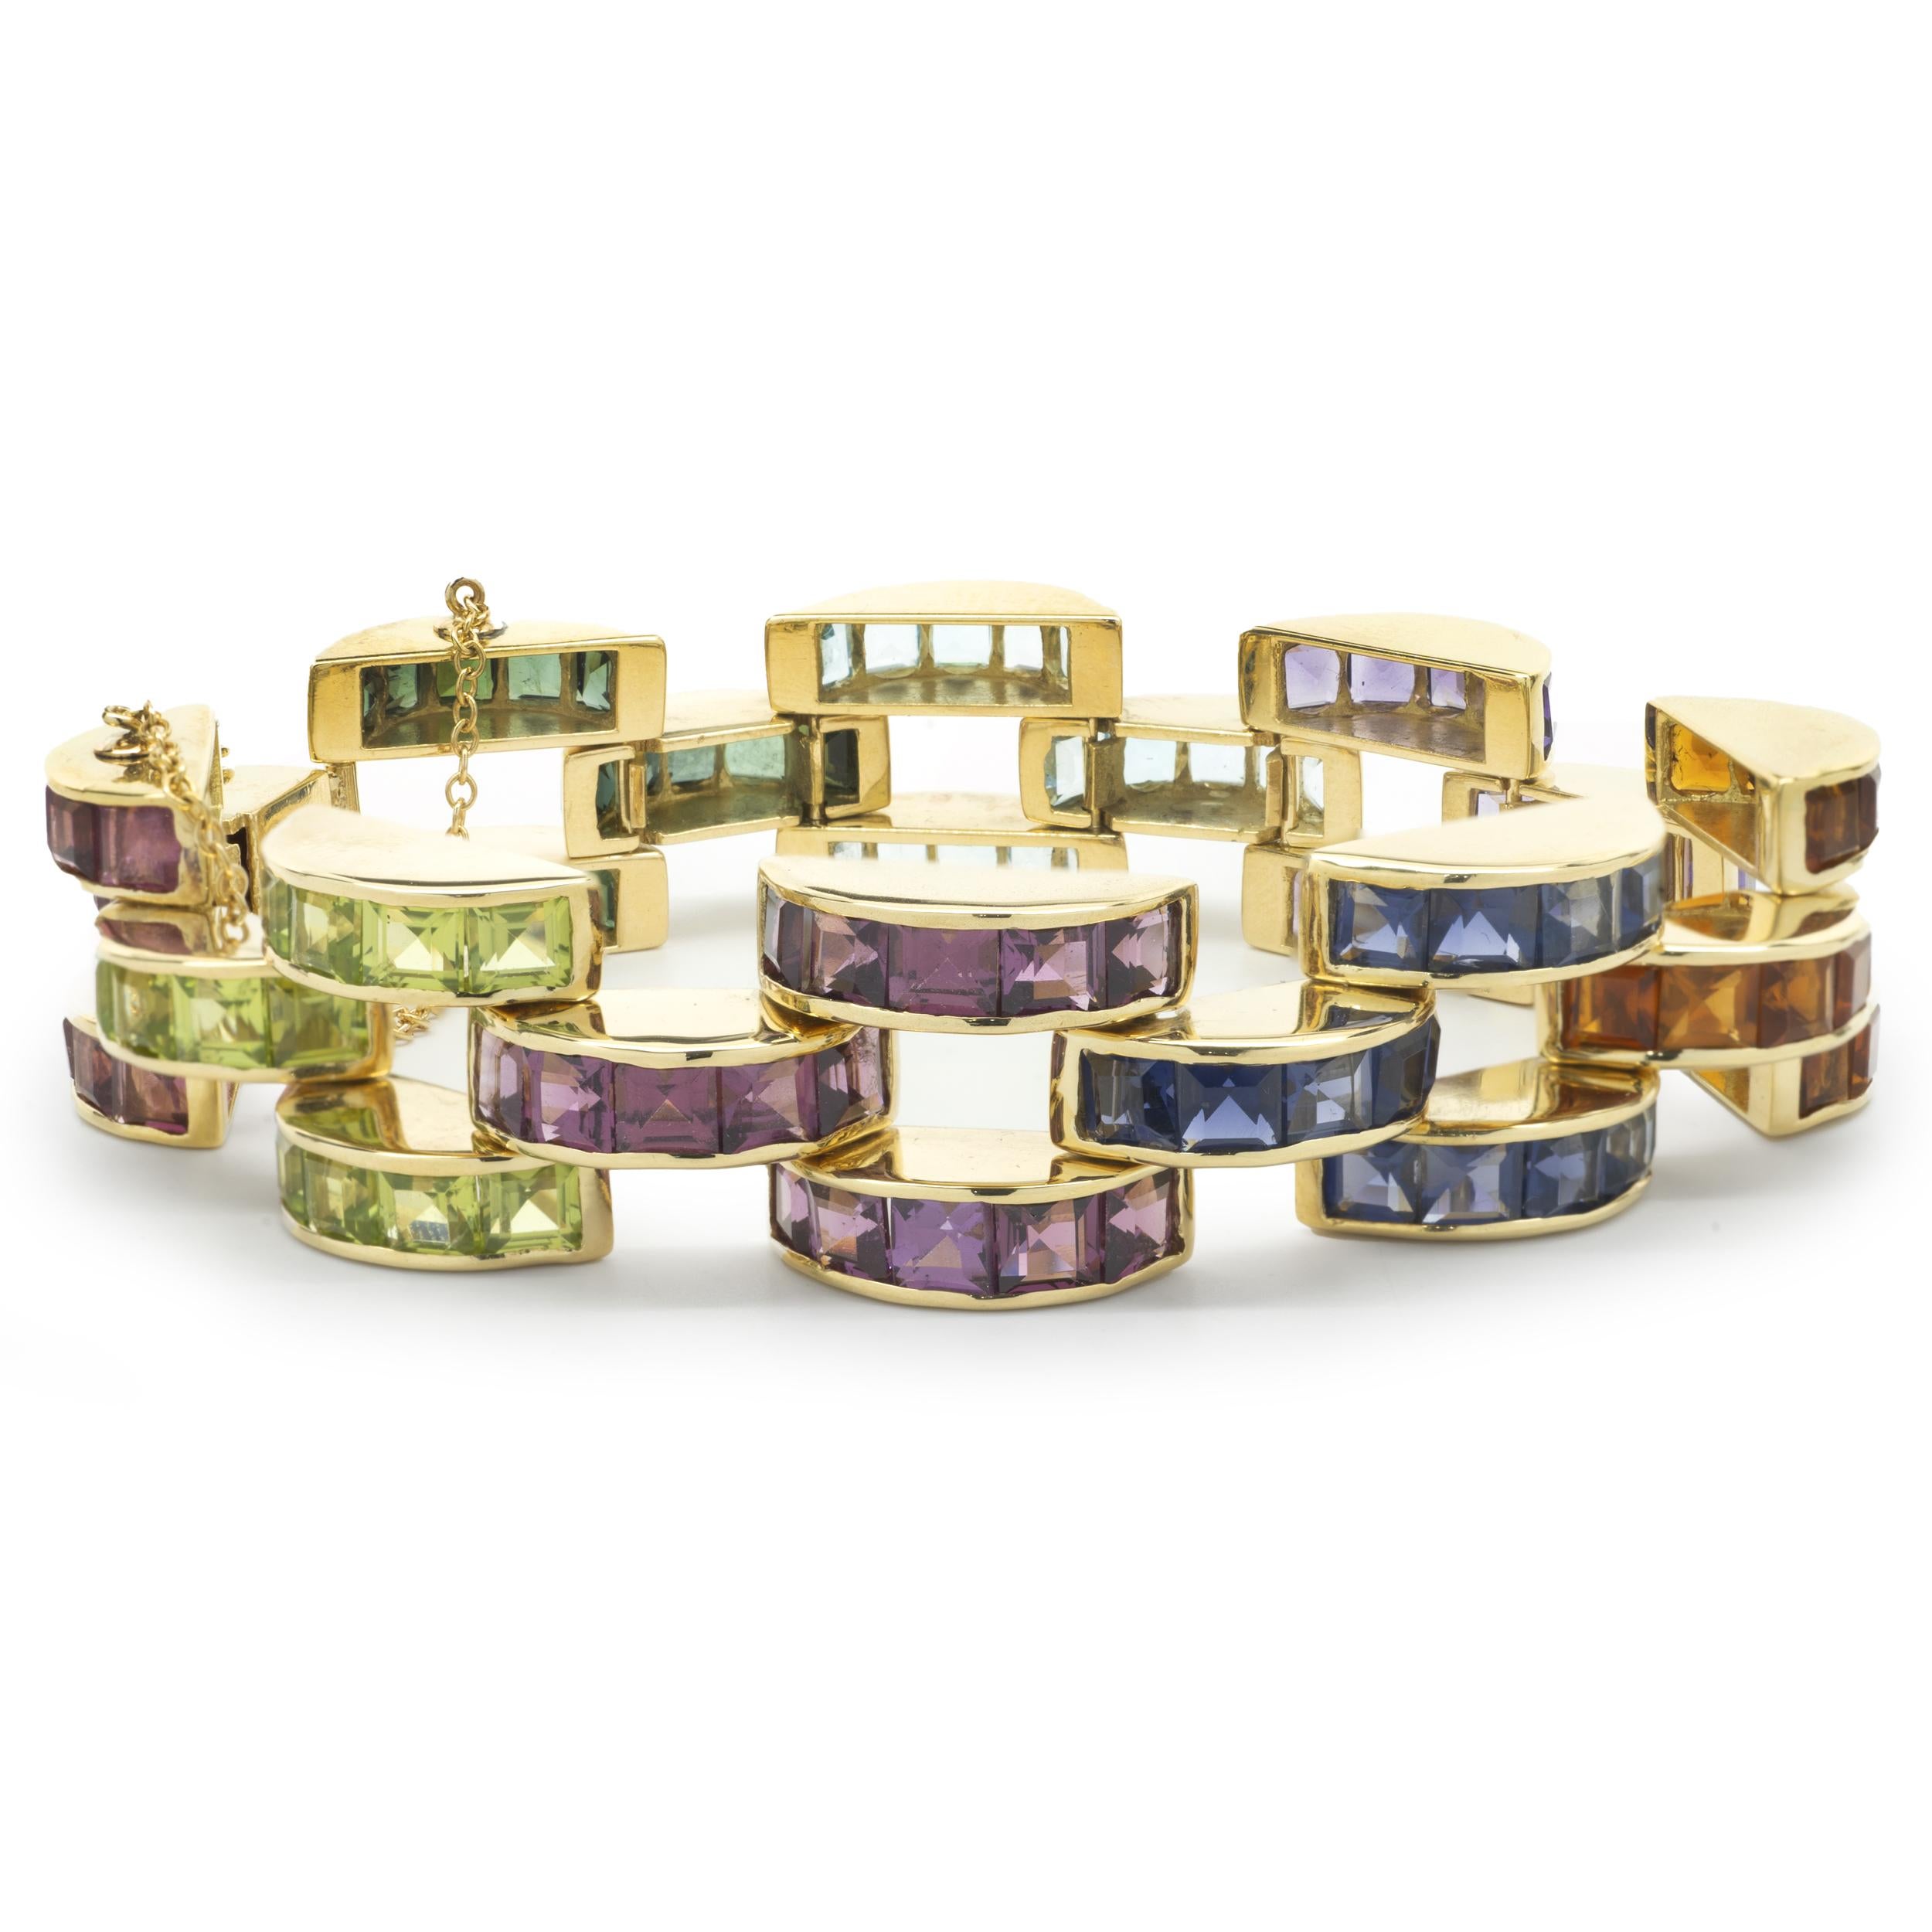 Designer: custom 
Material: 18K yellow gold
Dimensions: bracelet will fit up to a 7-inch wrist
Weight: 62.38 grams
